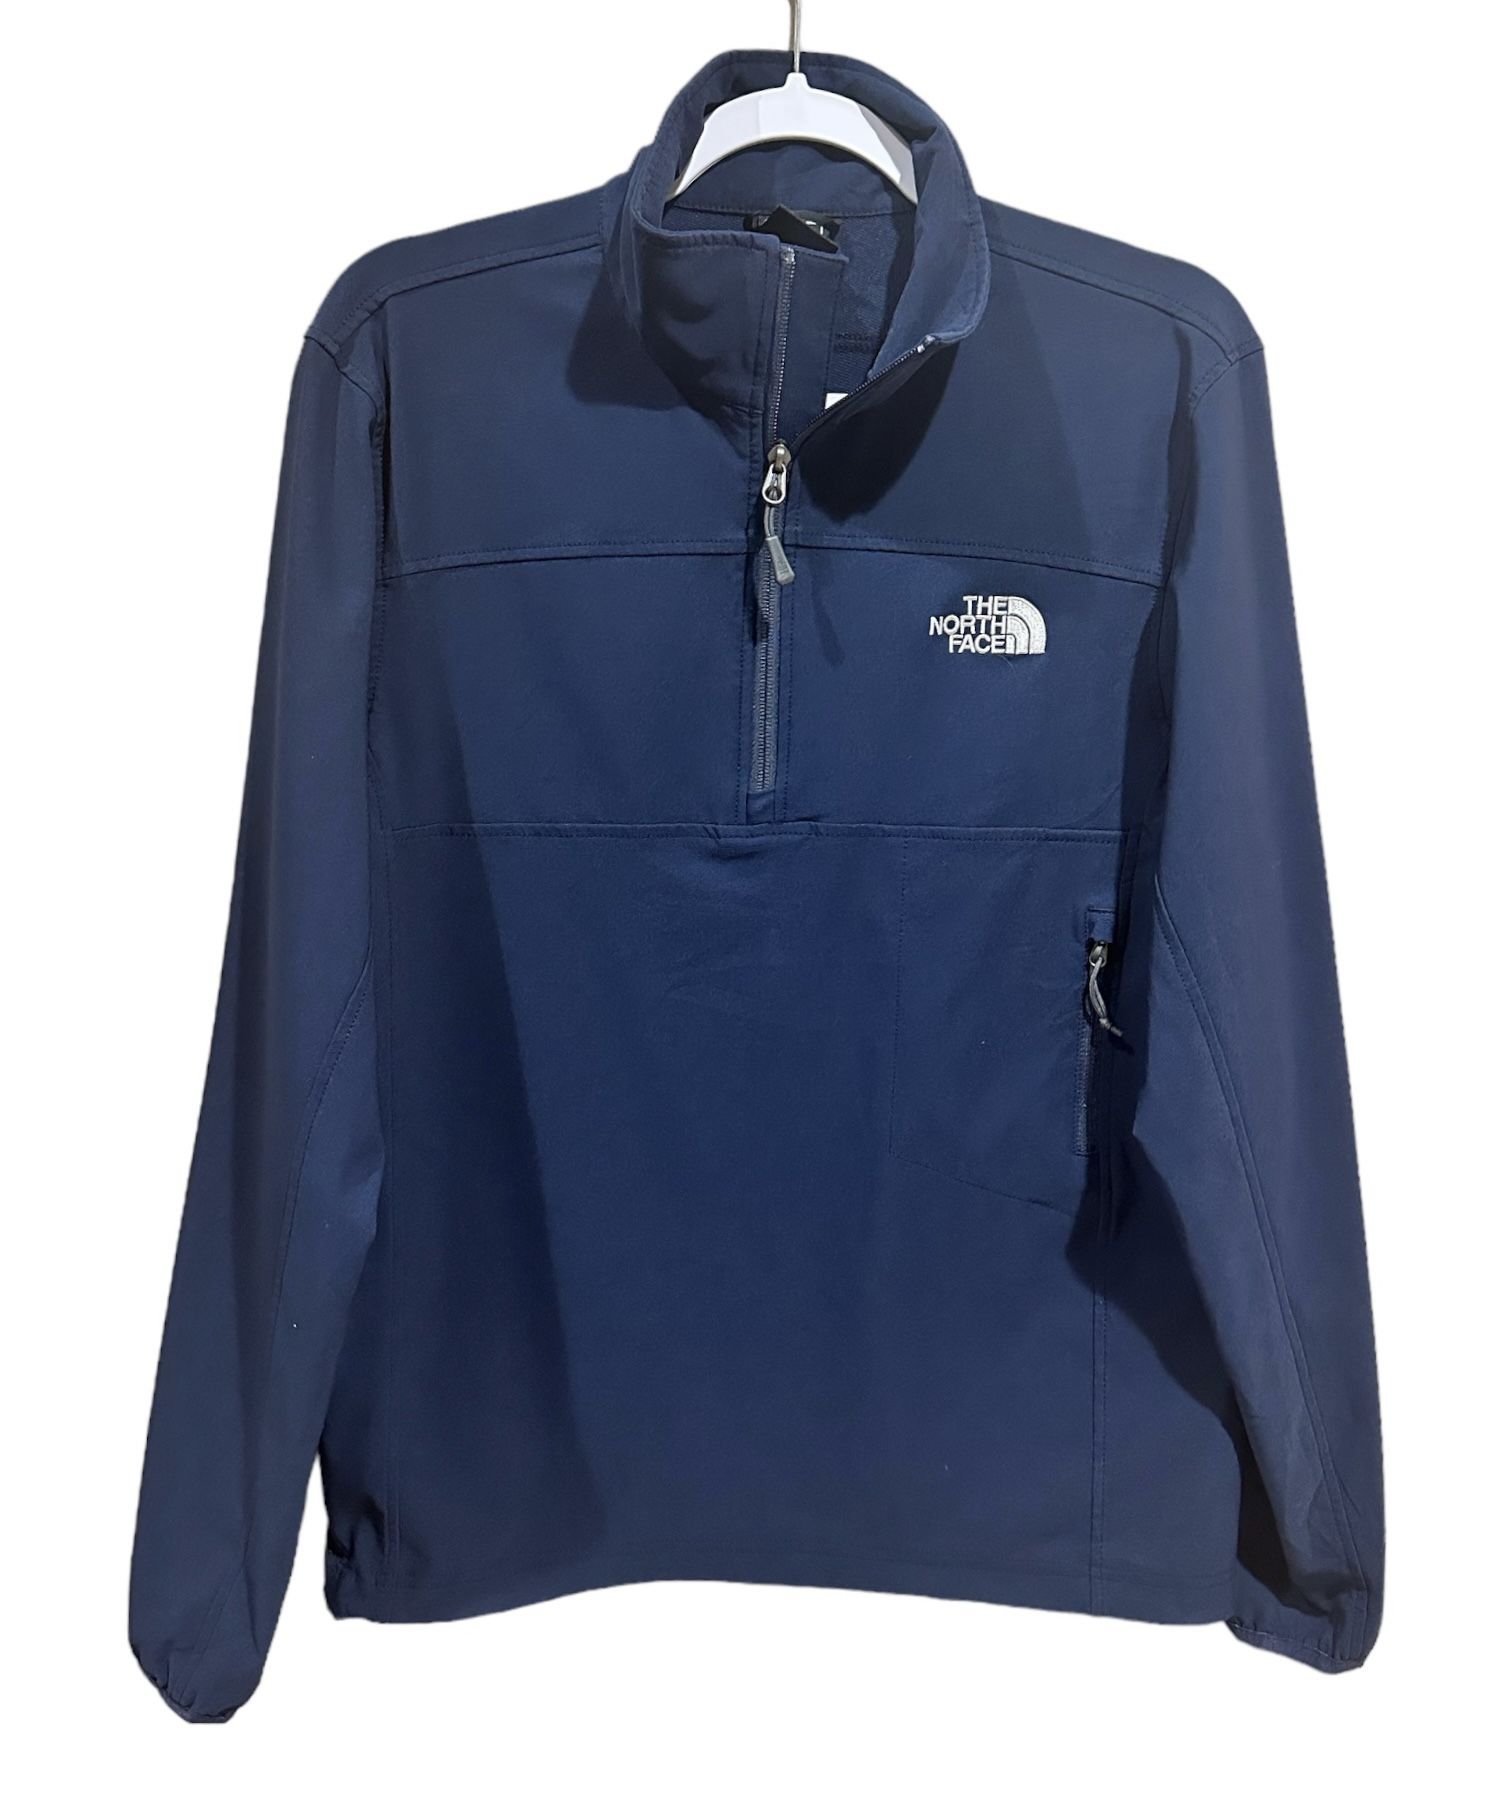 NORTH FACE Men’s Size Small Navy Blue Nimble 1/4 Zip Long Sleeve Pullover